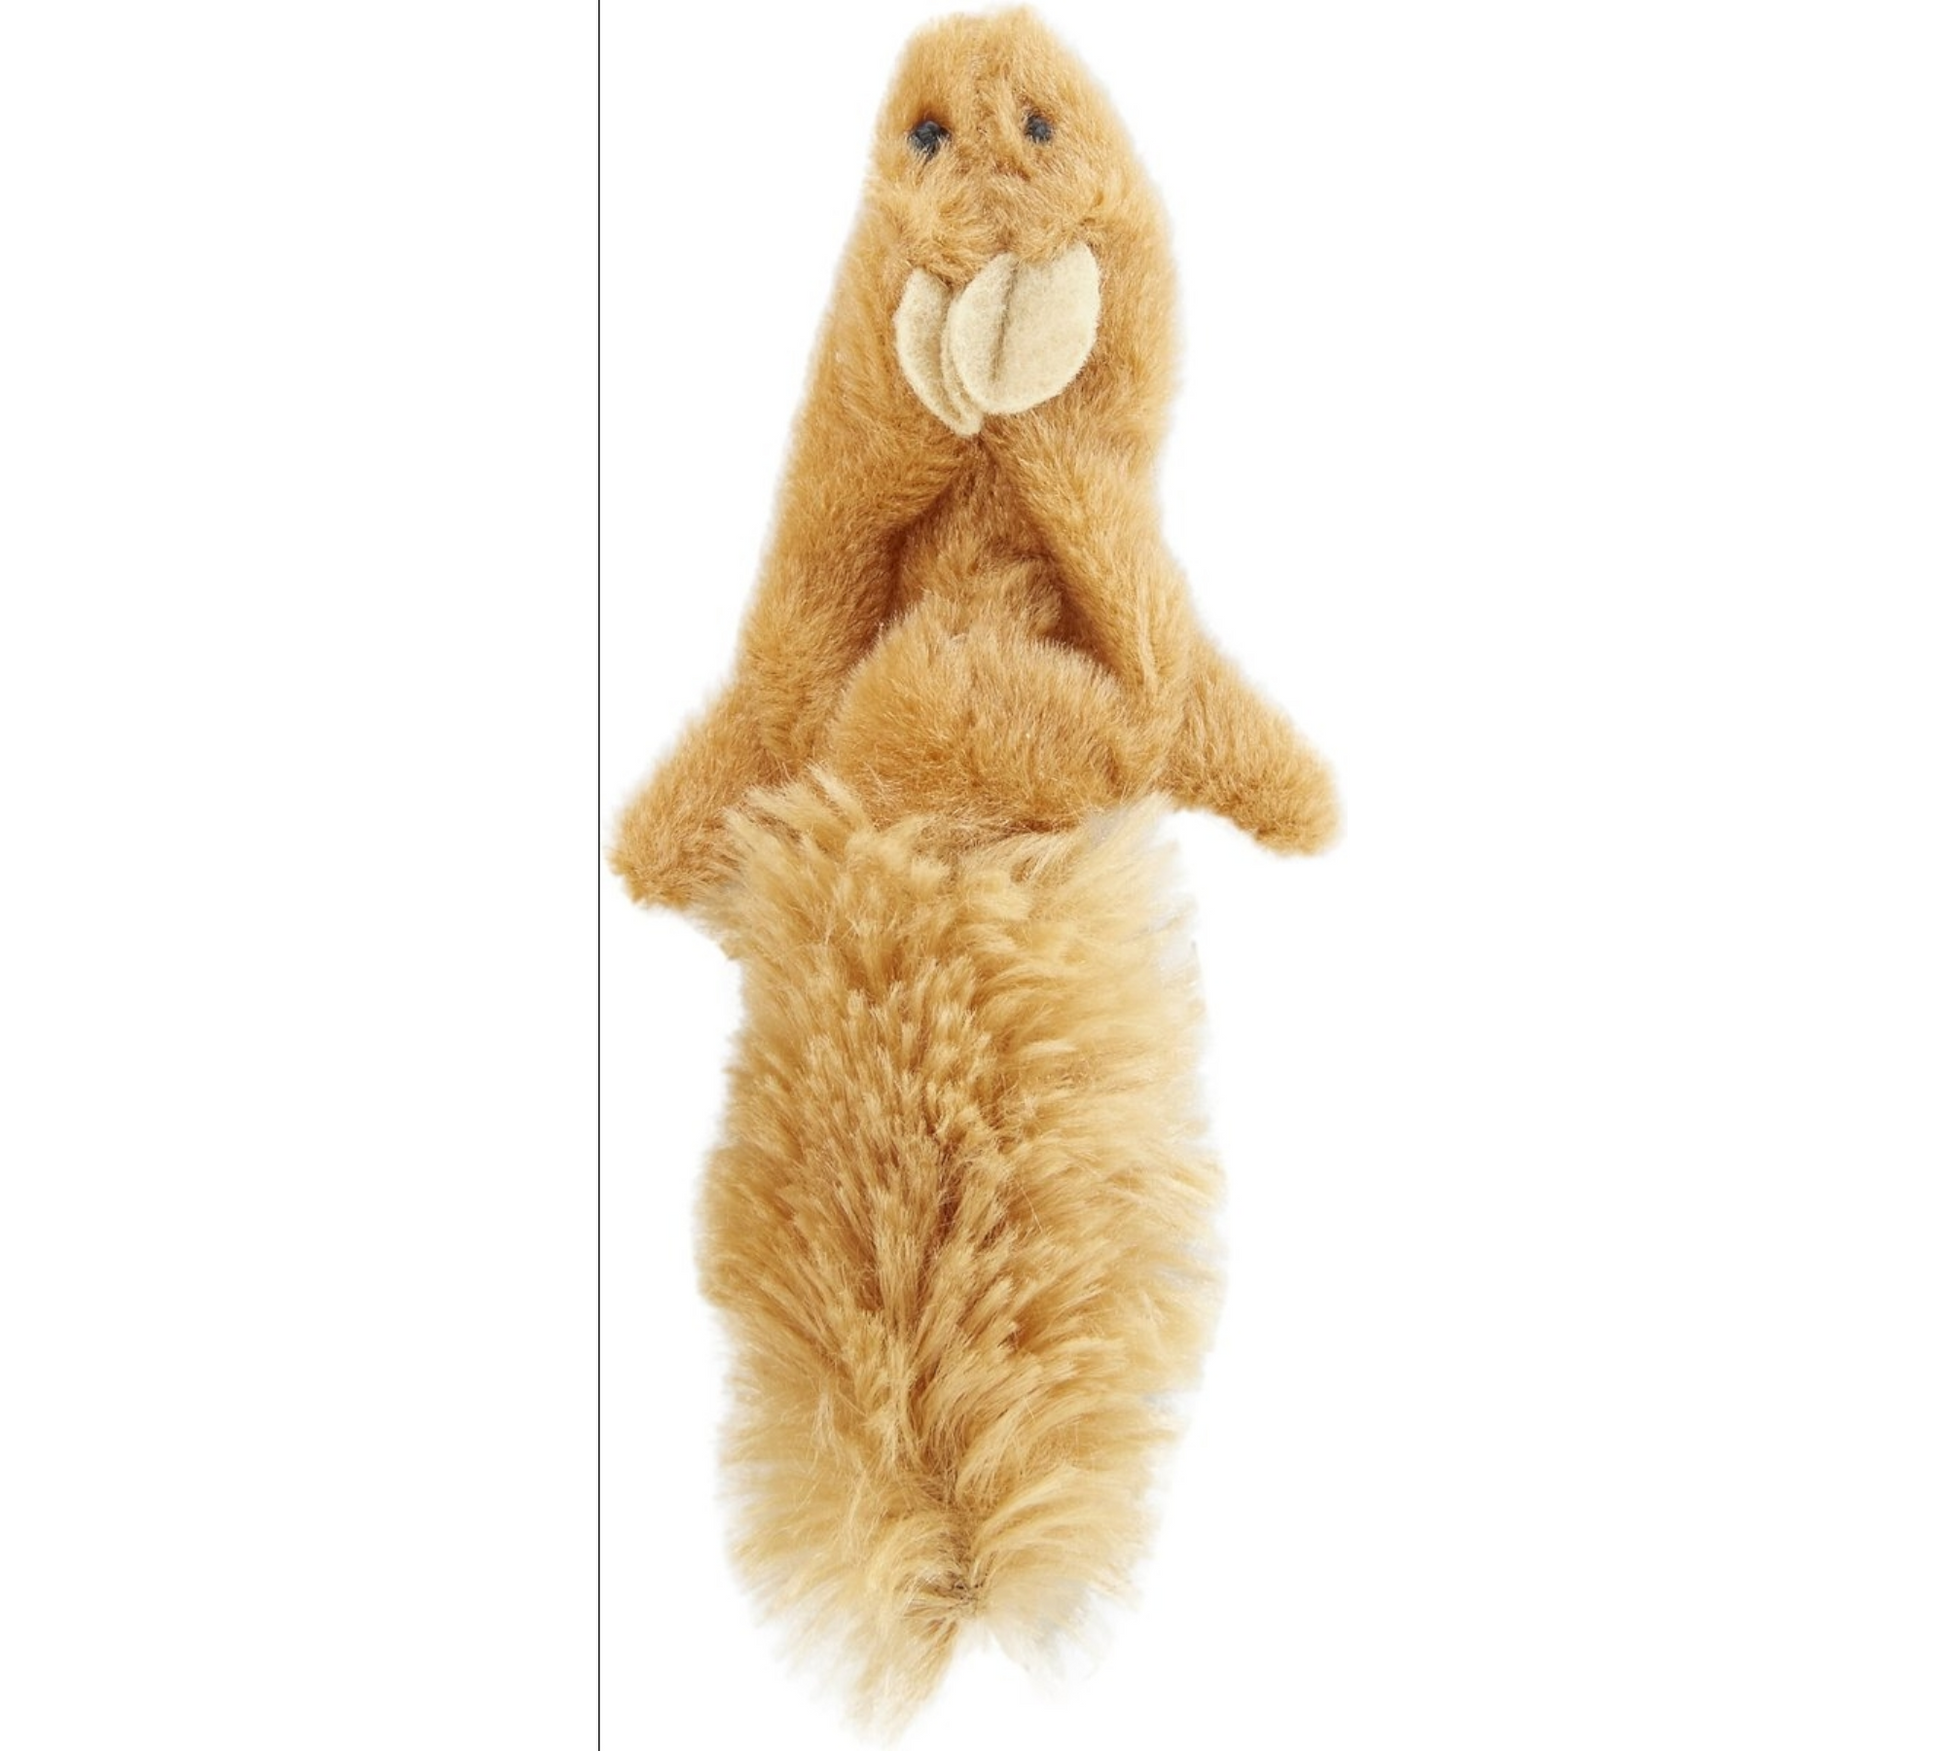 Canine's World Catnip Toys Spot Pet Skinneeez Forest Creature Stuffing-Free Plush Cat Toy with Catnip, Color Varies Spot